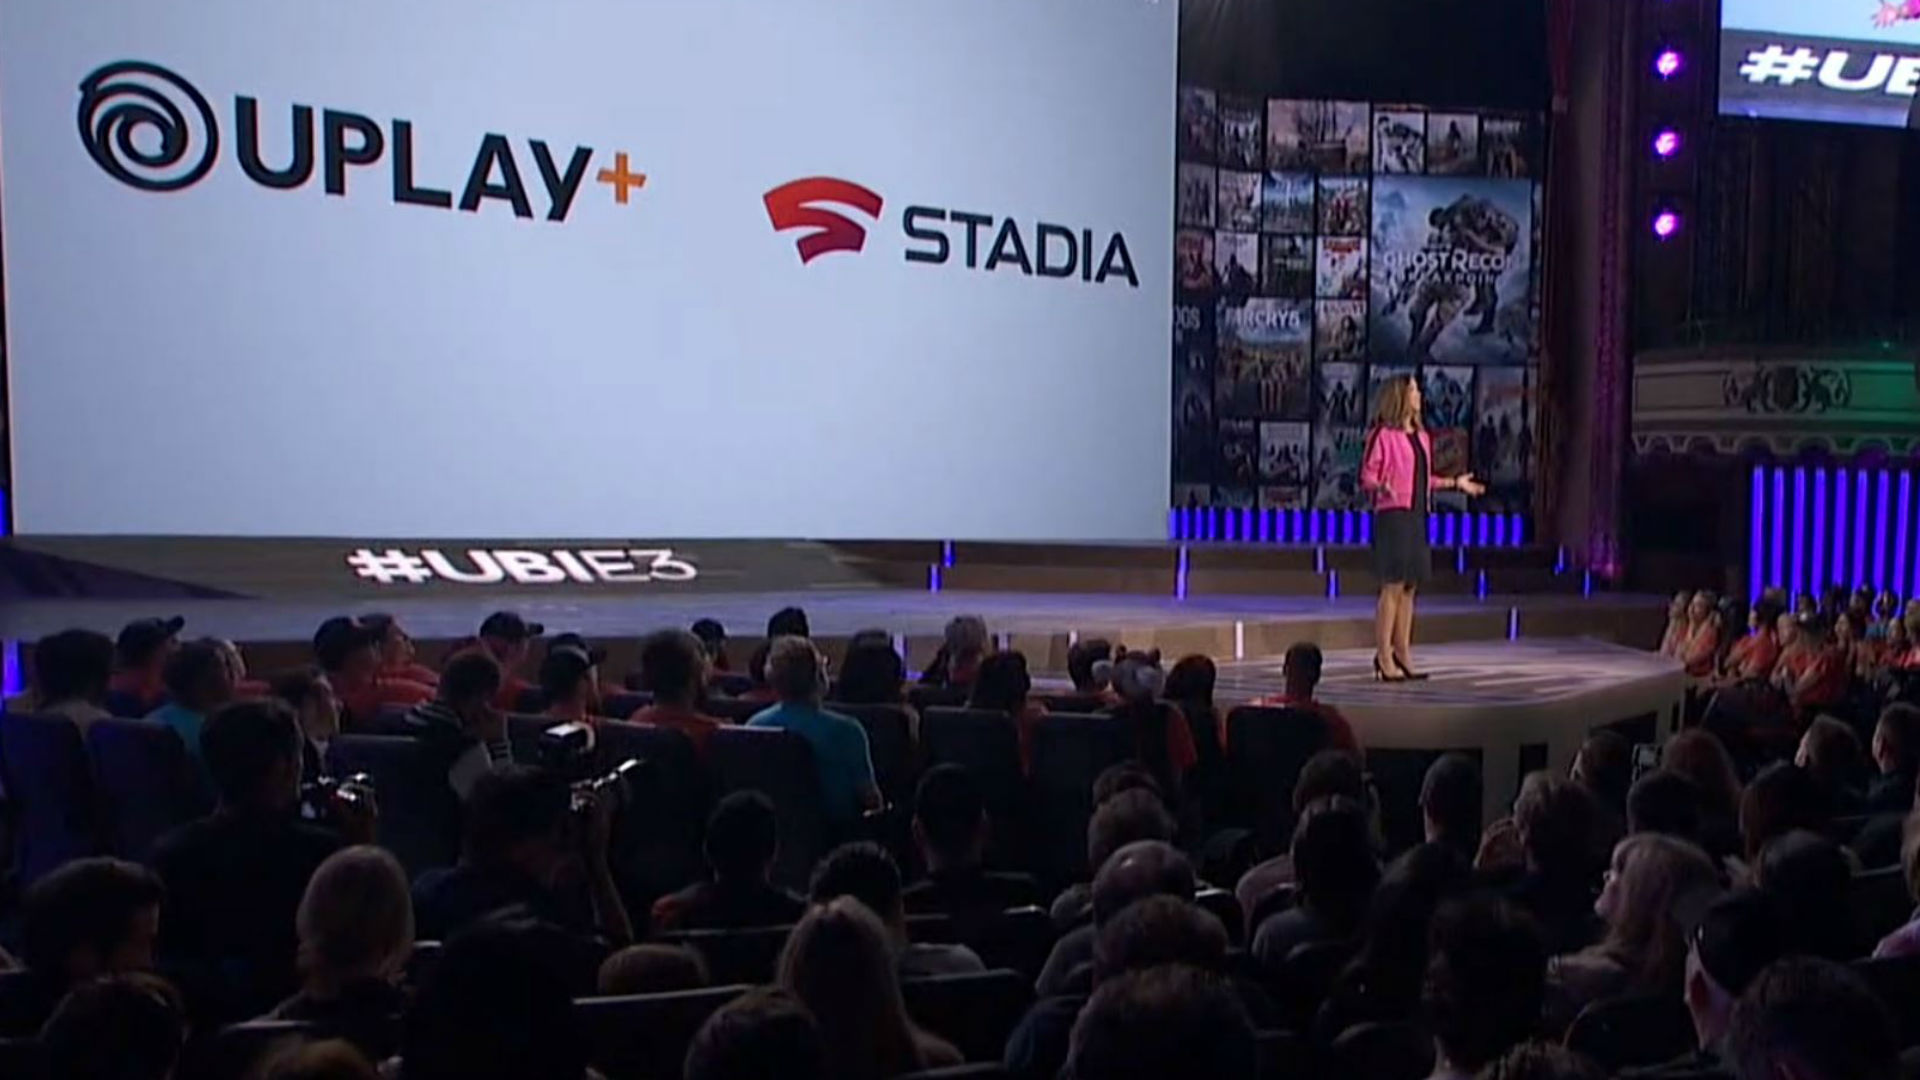 Ubisofts Upcoming Service Uplay Is Heading To Google Stadia